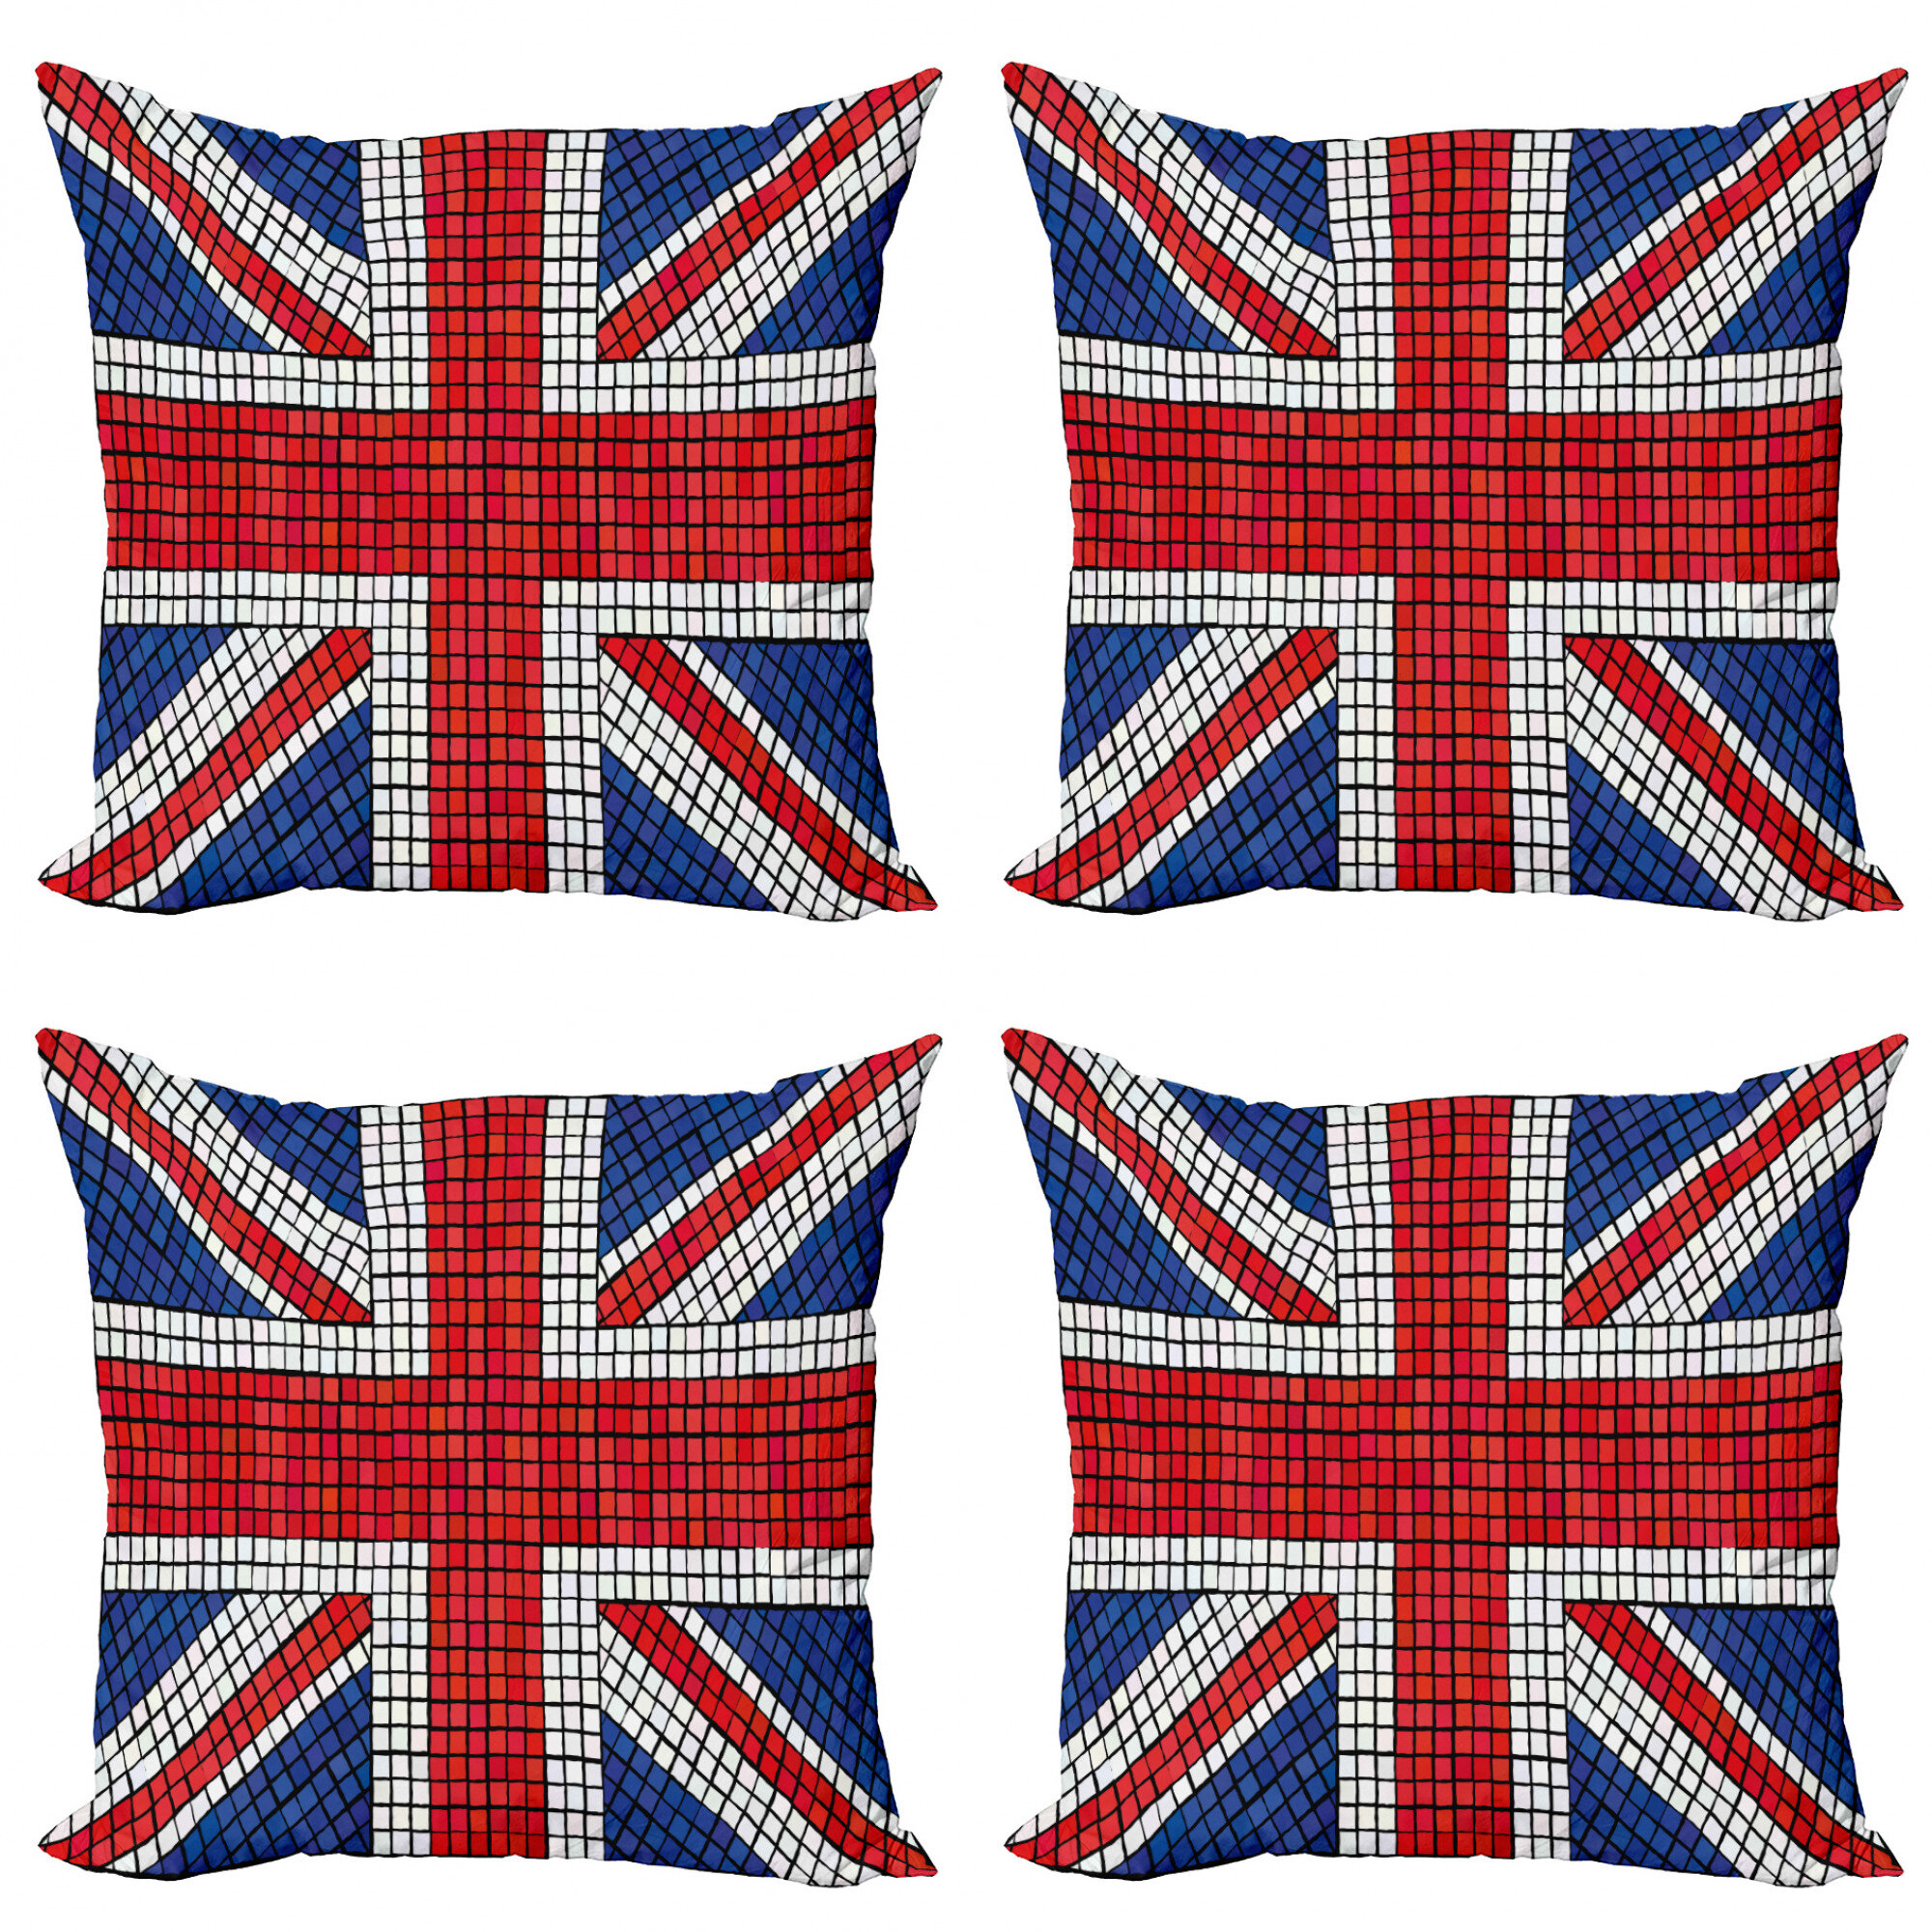 20 X 20 Decorative Square Accent Pillow Case Ambesonne Union Jack Throw Pillow Cushion Cover Grunge Industrial Themed Composition of UK and USA Flags Vintage Print Navy Blue